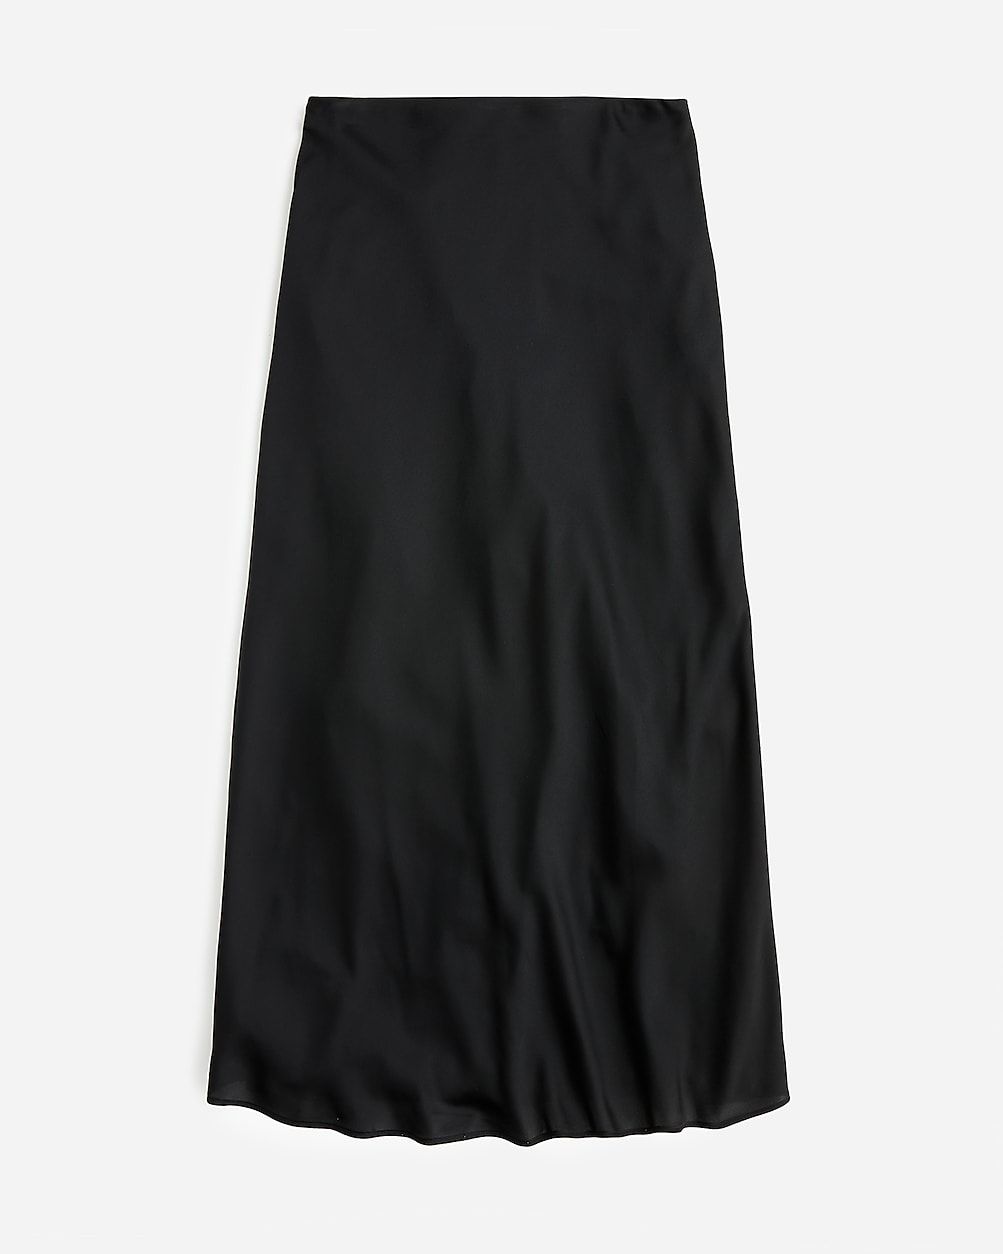 best seller4.4(509 REVIEWS)Gwyneth slip skirt$54.50$89.50 (39% Off)Limited time. Price as marked.... | J.Crew US